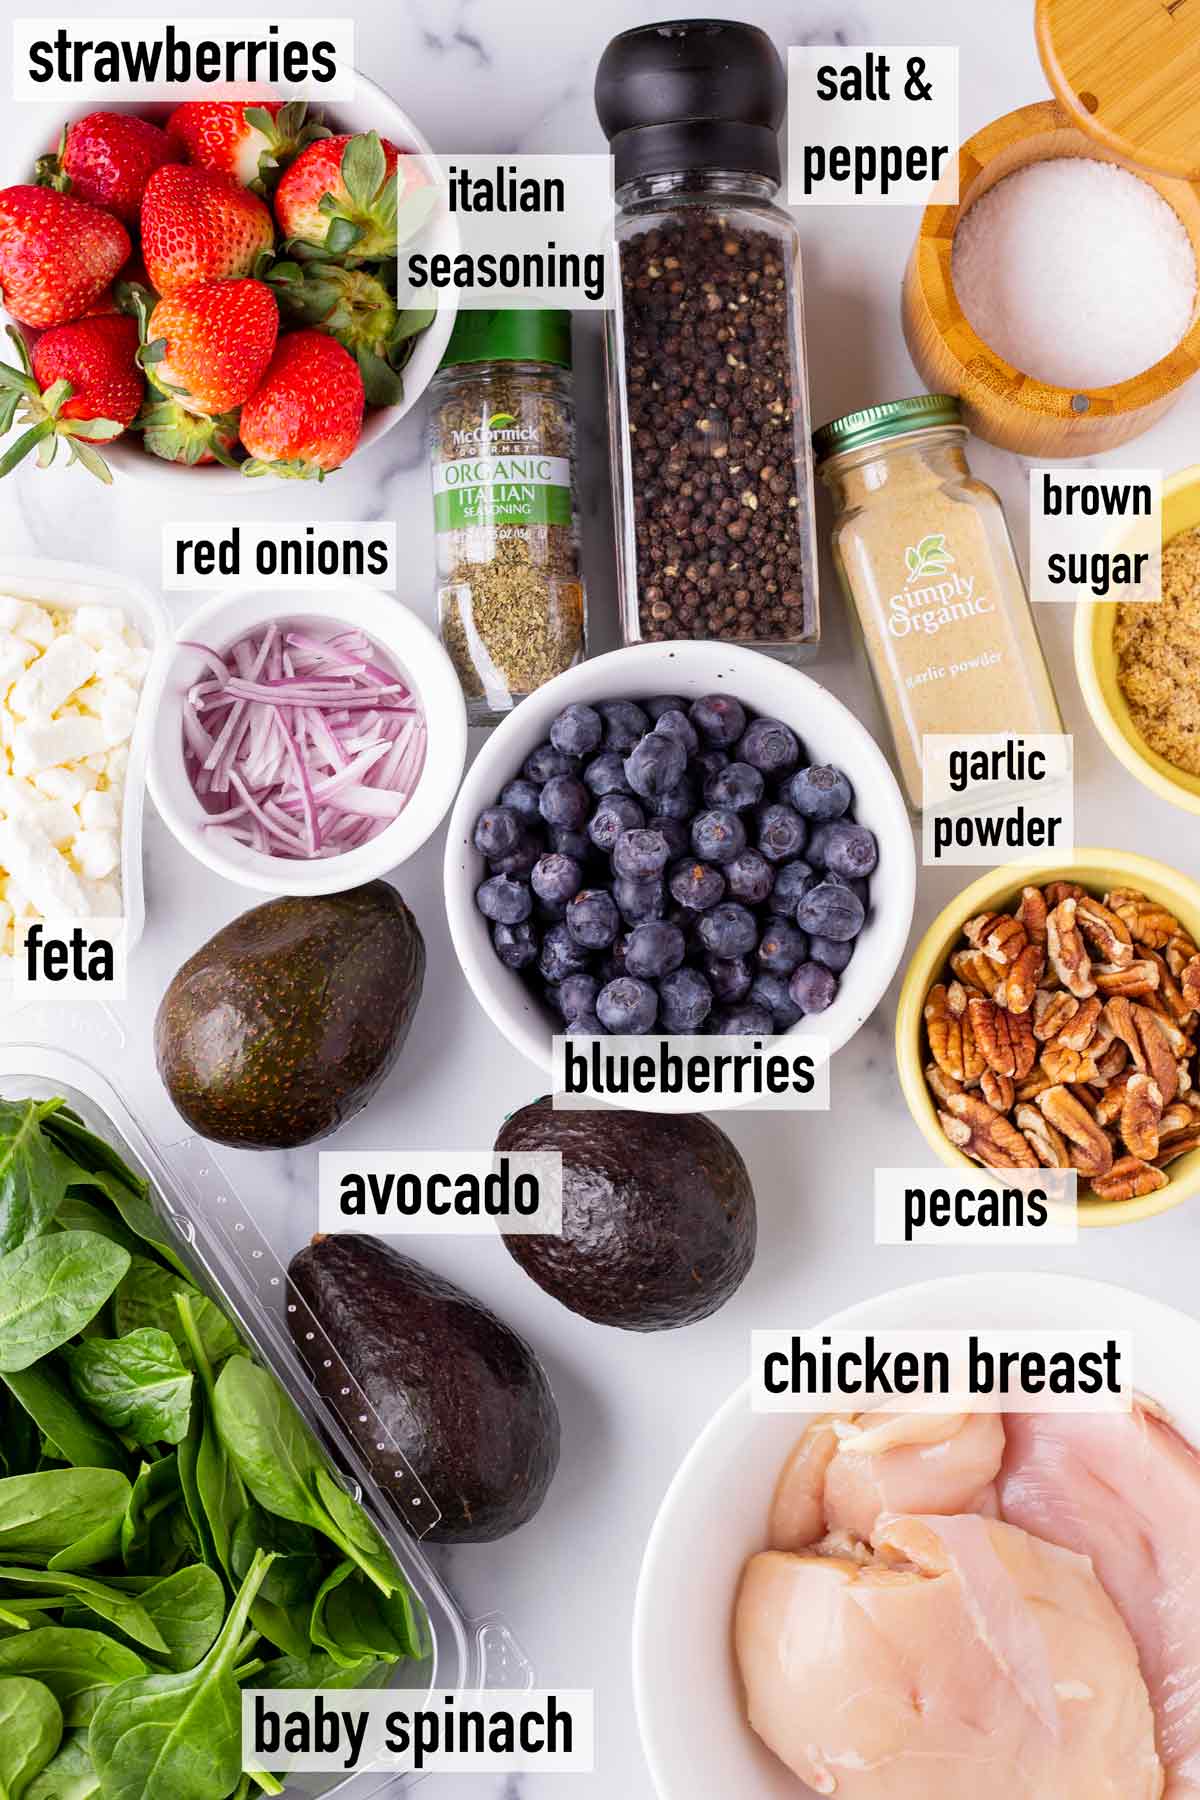 labeled ingredients to make strawberry spinach salad